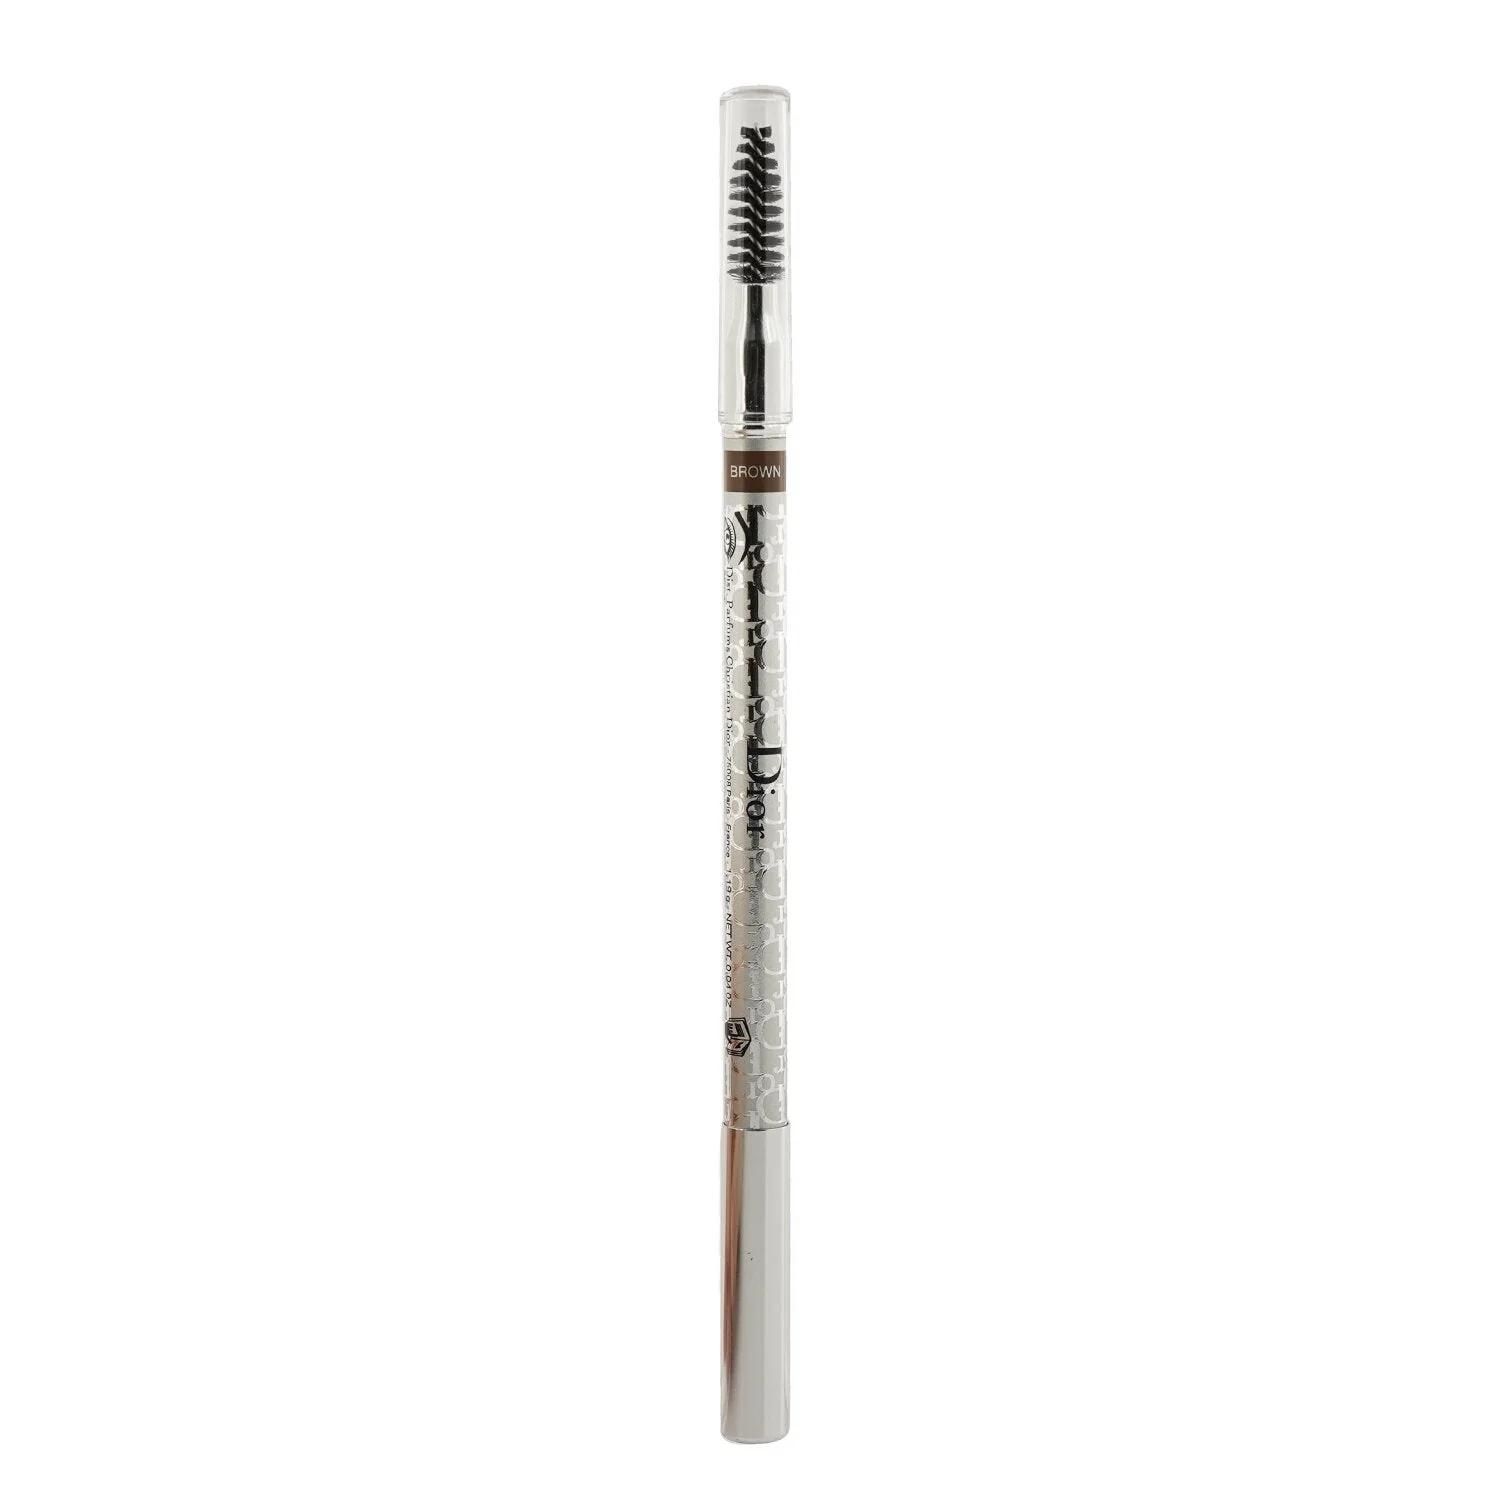 Diorshow Waterproof Crayon Sourcils Poudre - # 03 Brown - 1.19g/0.04oz - image 2 of 5